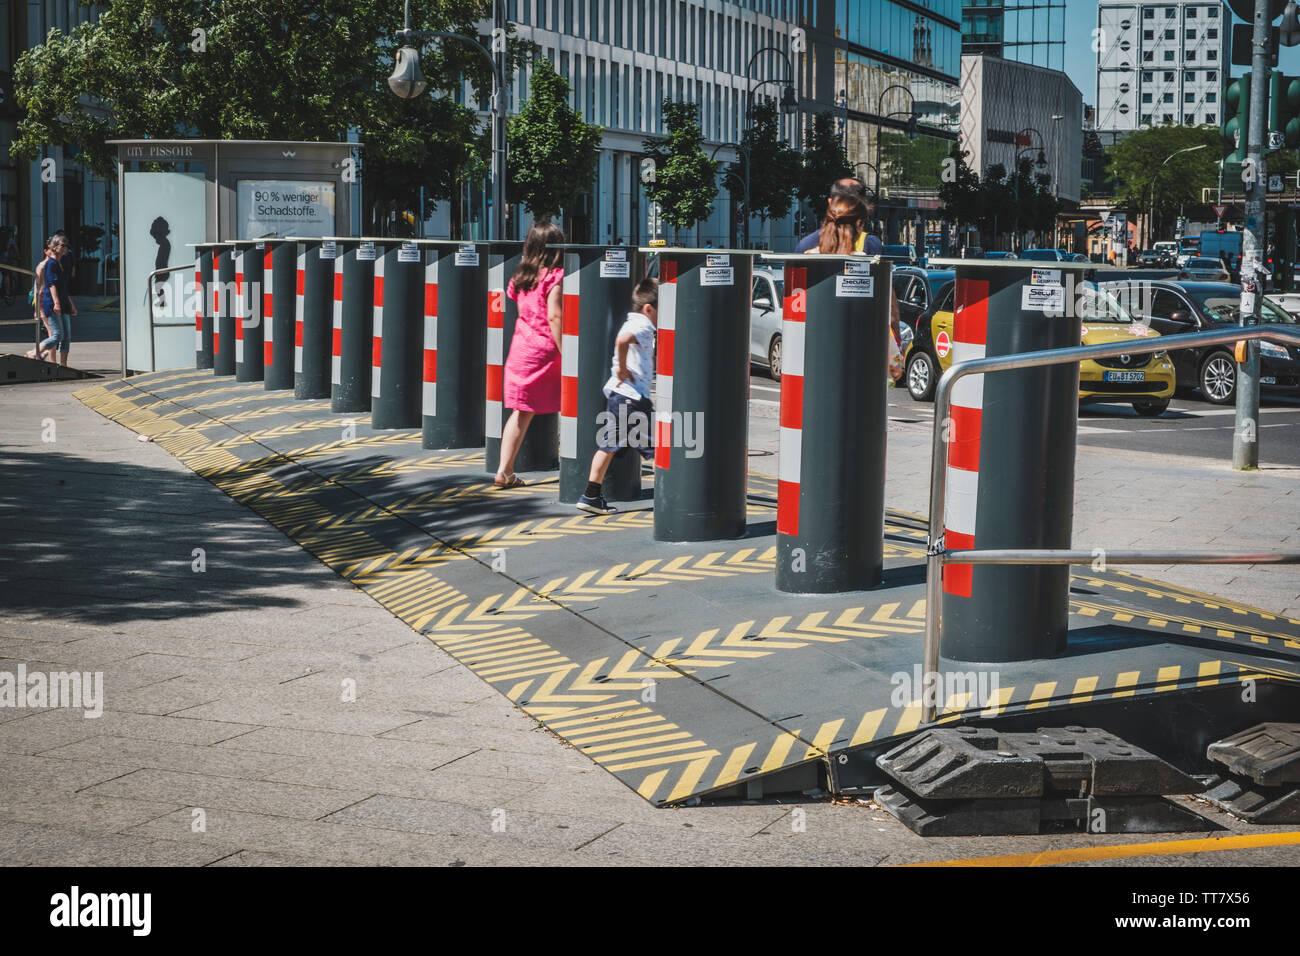 Berlin, Germany - june 2019: Anti terror protection onstreet by barricades or bollards preventing vehicles to drive on sidewalk in Berlin, Germany Stock Photo